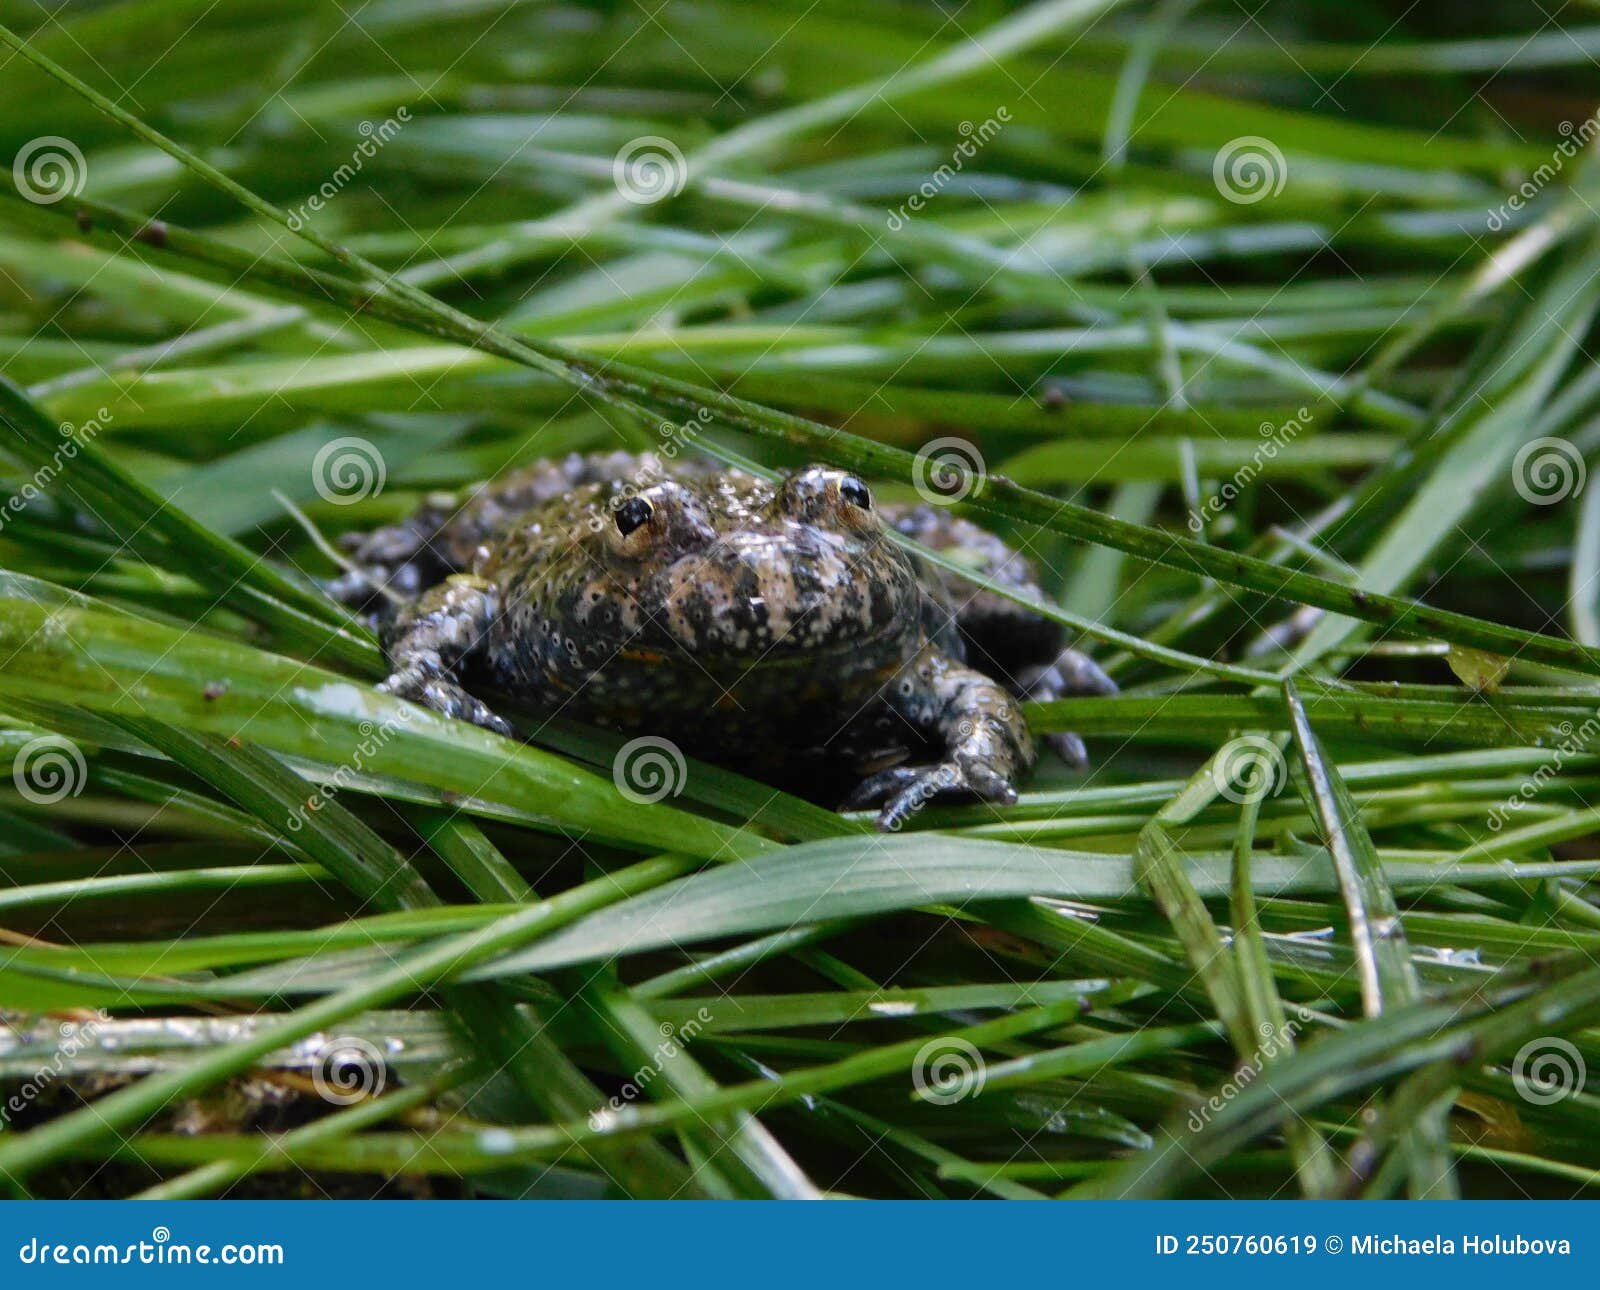 Fire belly toad in a trap stock image. Image of environment - 250760619